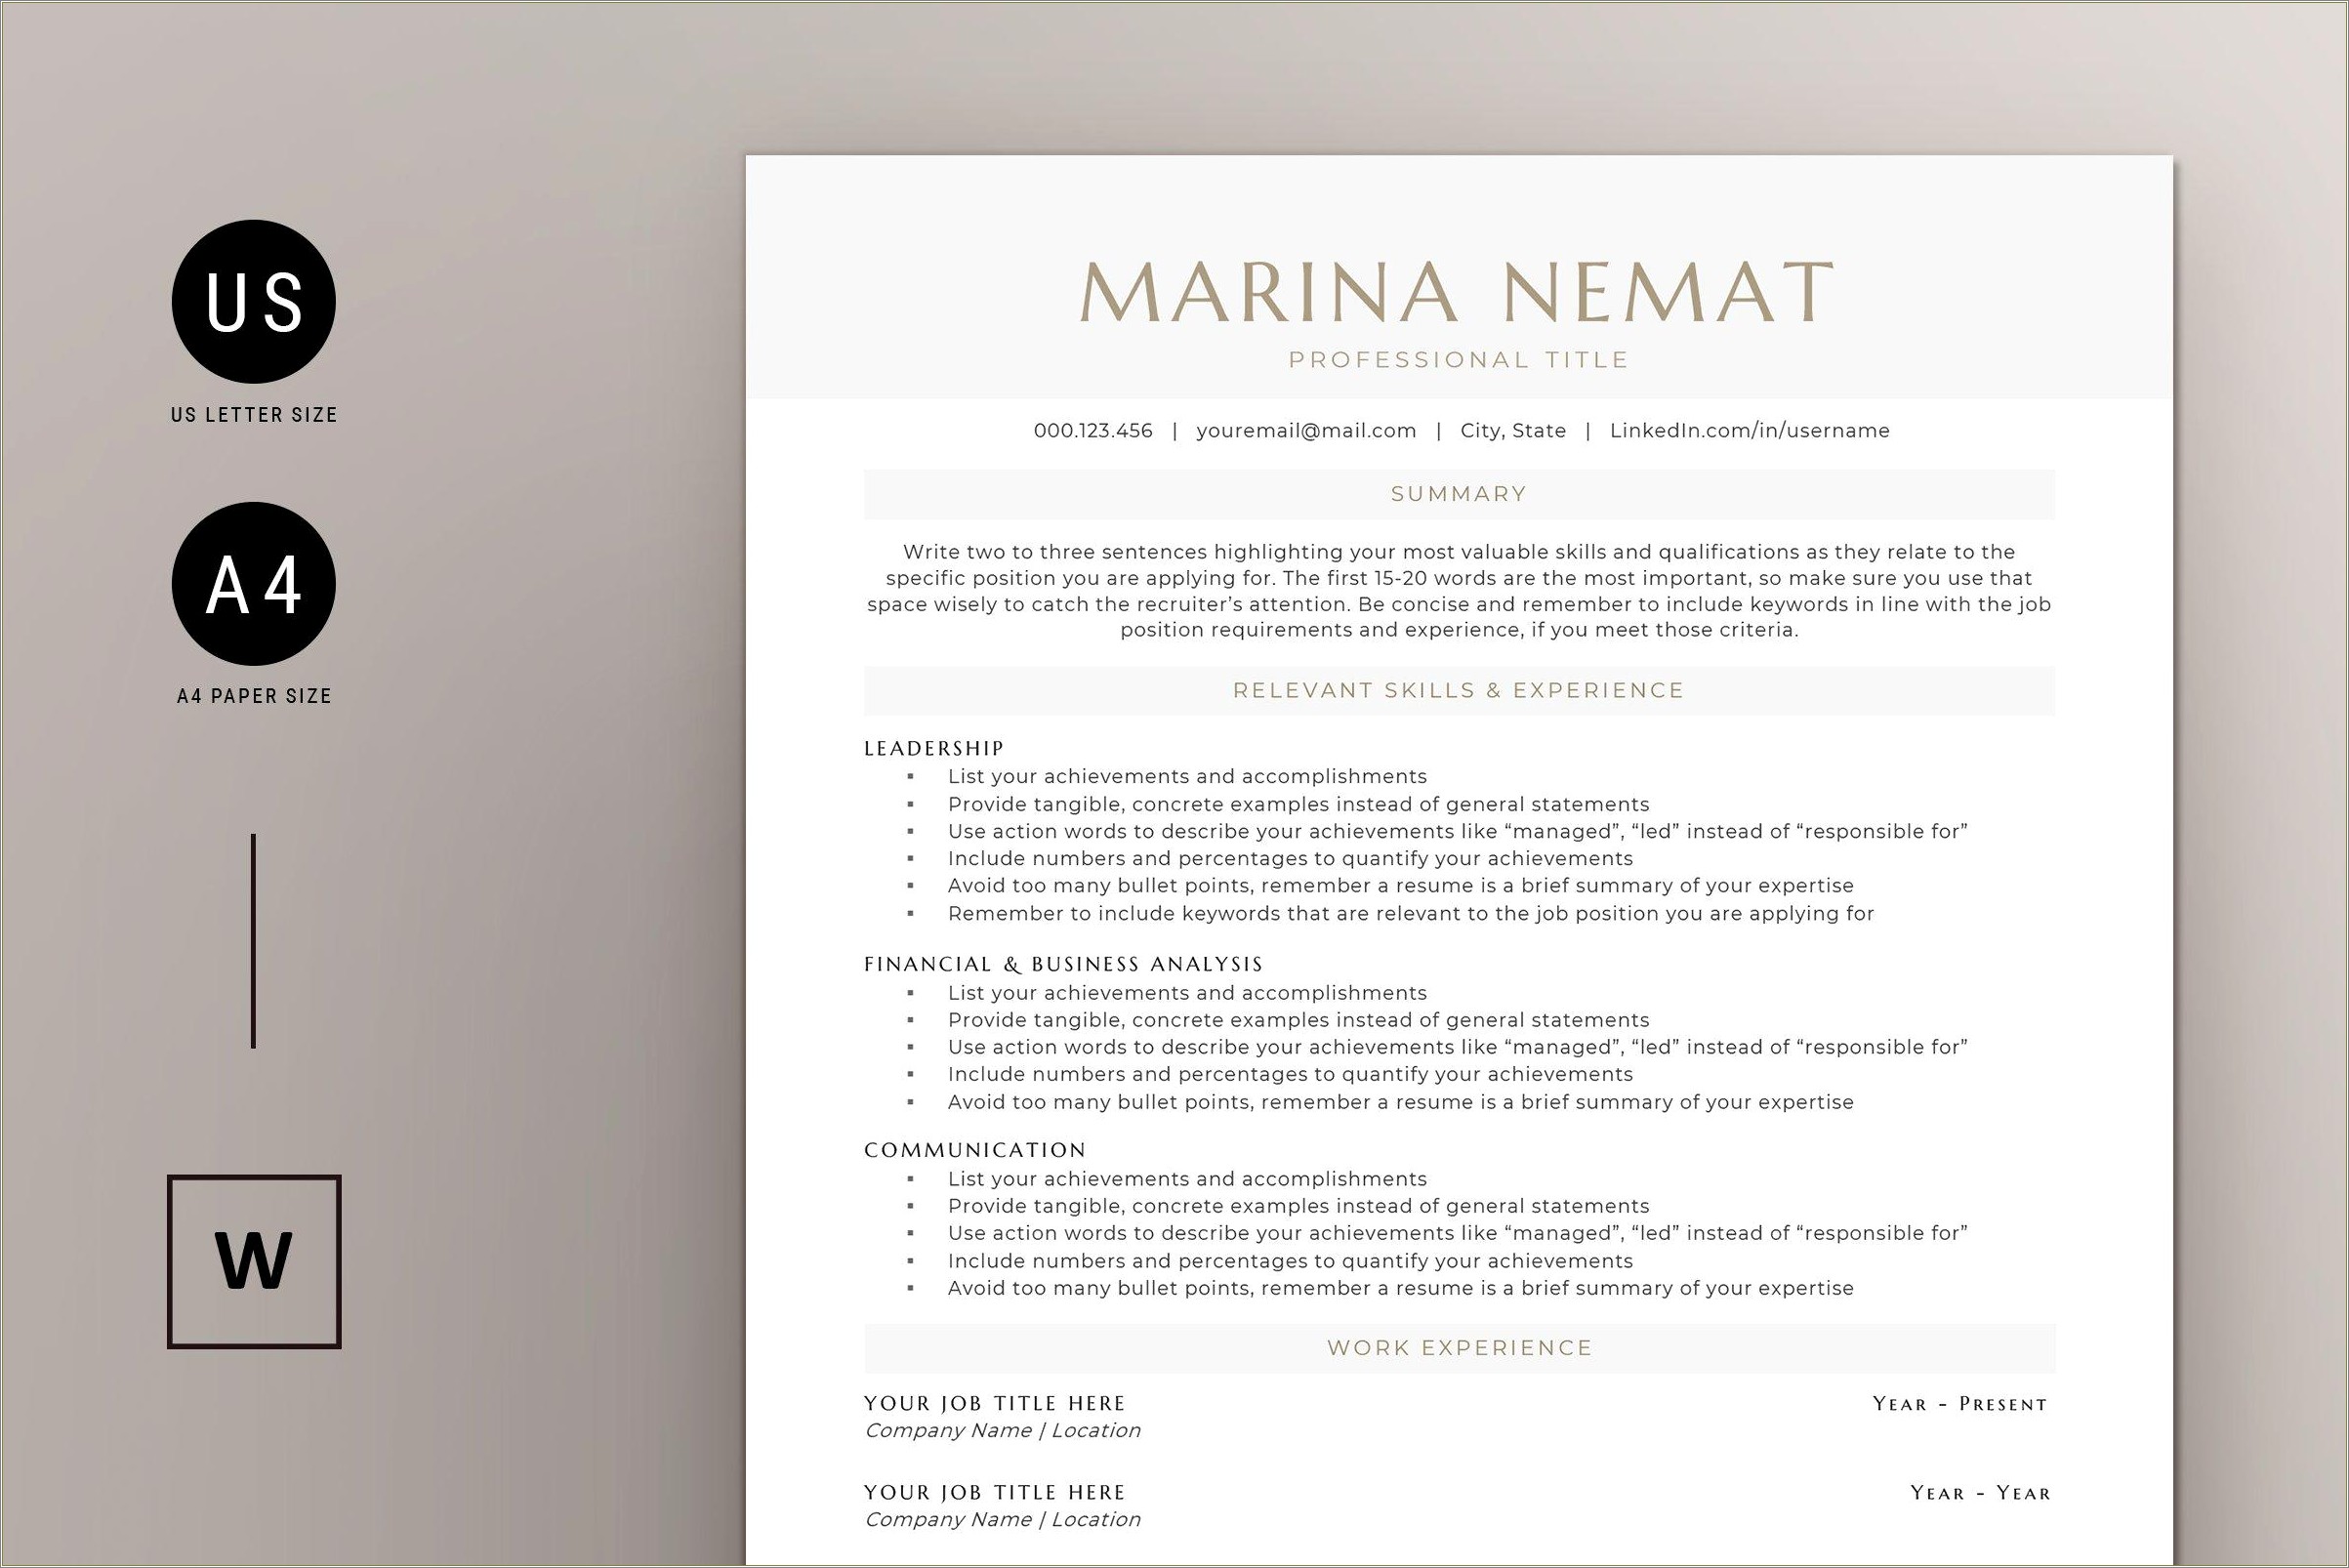 Resume Summary Instead Of Bullet Points